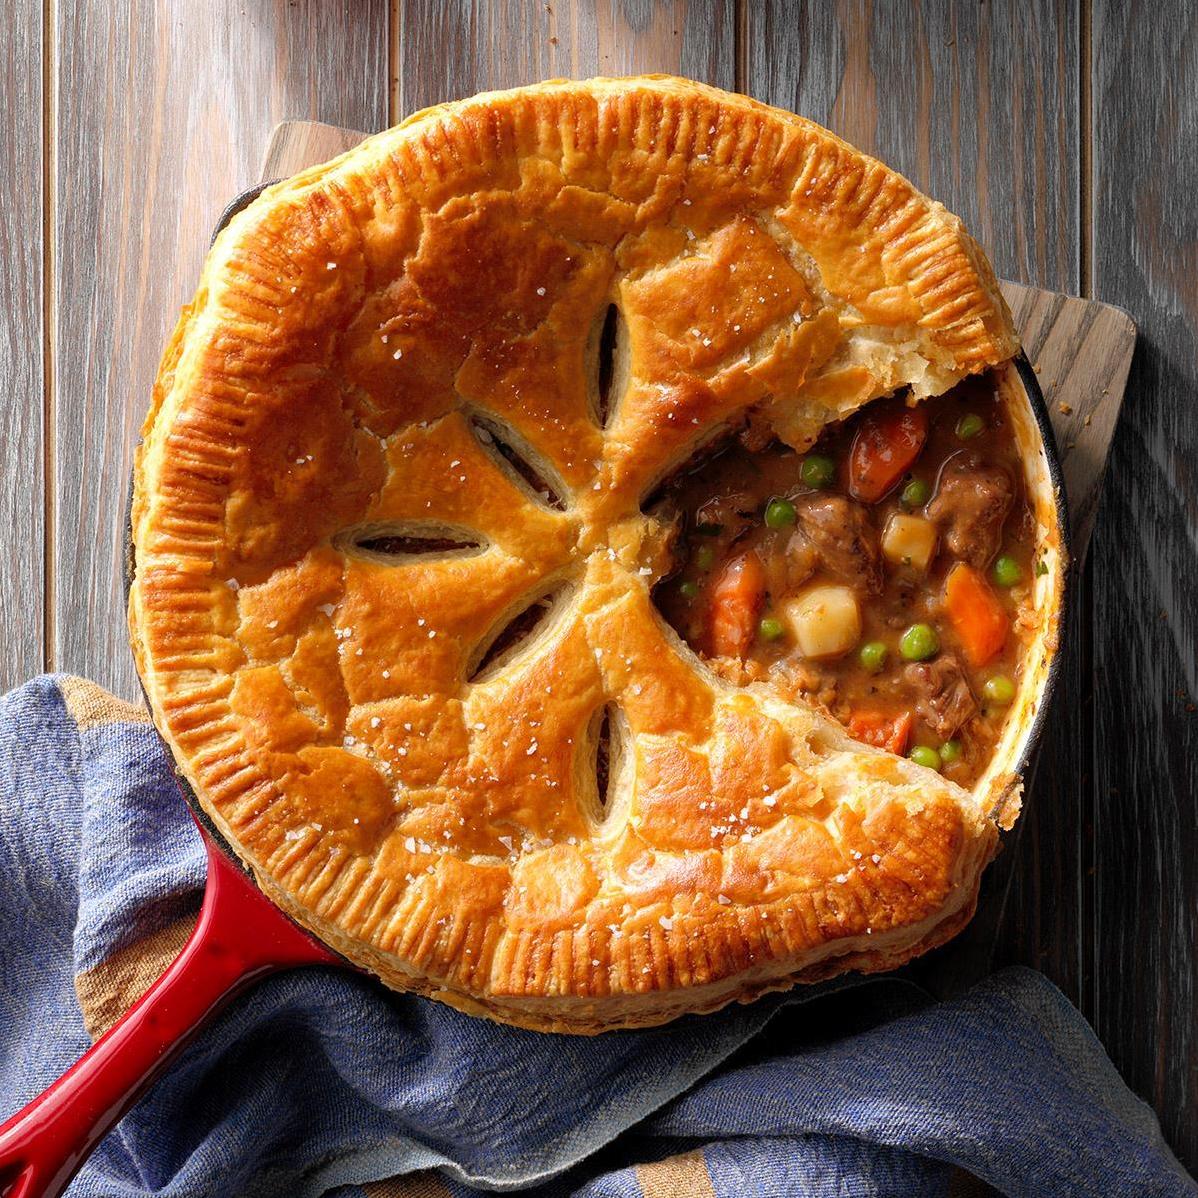  Deliciously fragrant Vietnamese spices make this beef hotpot pie special